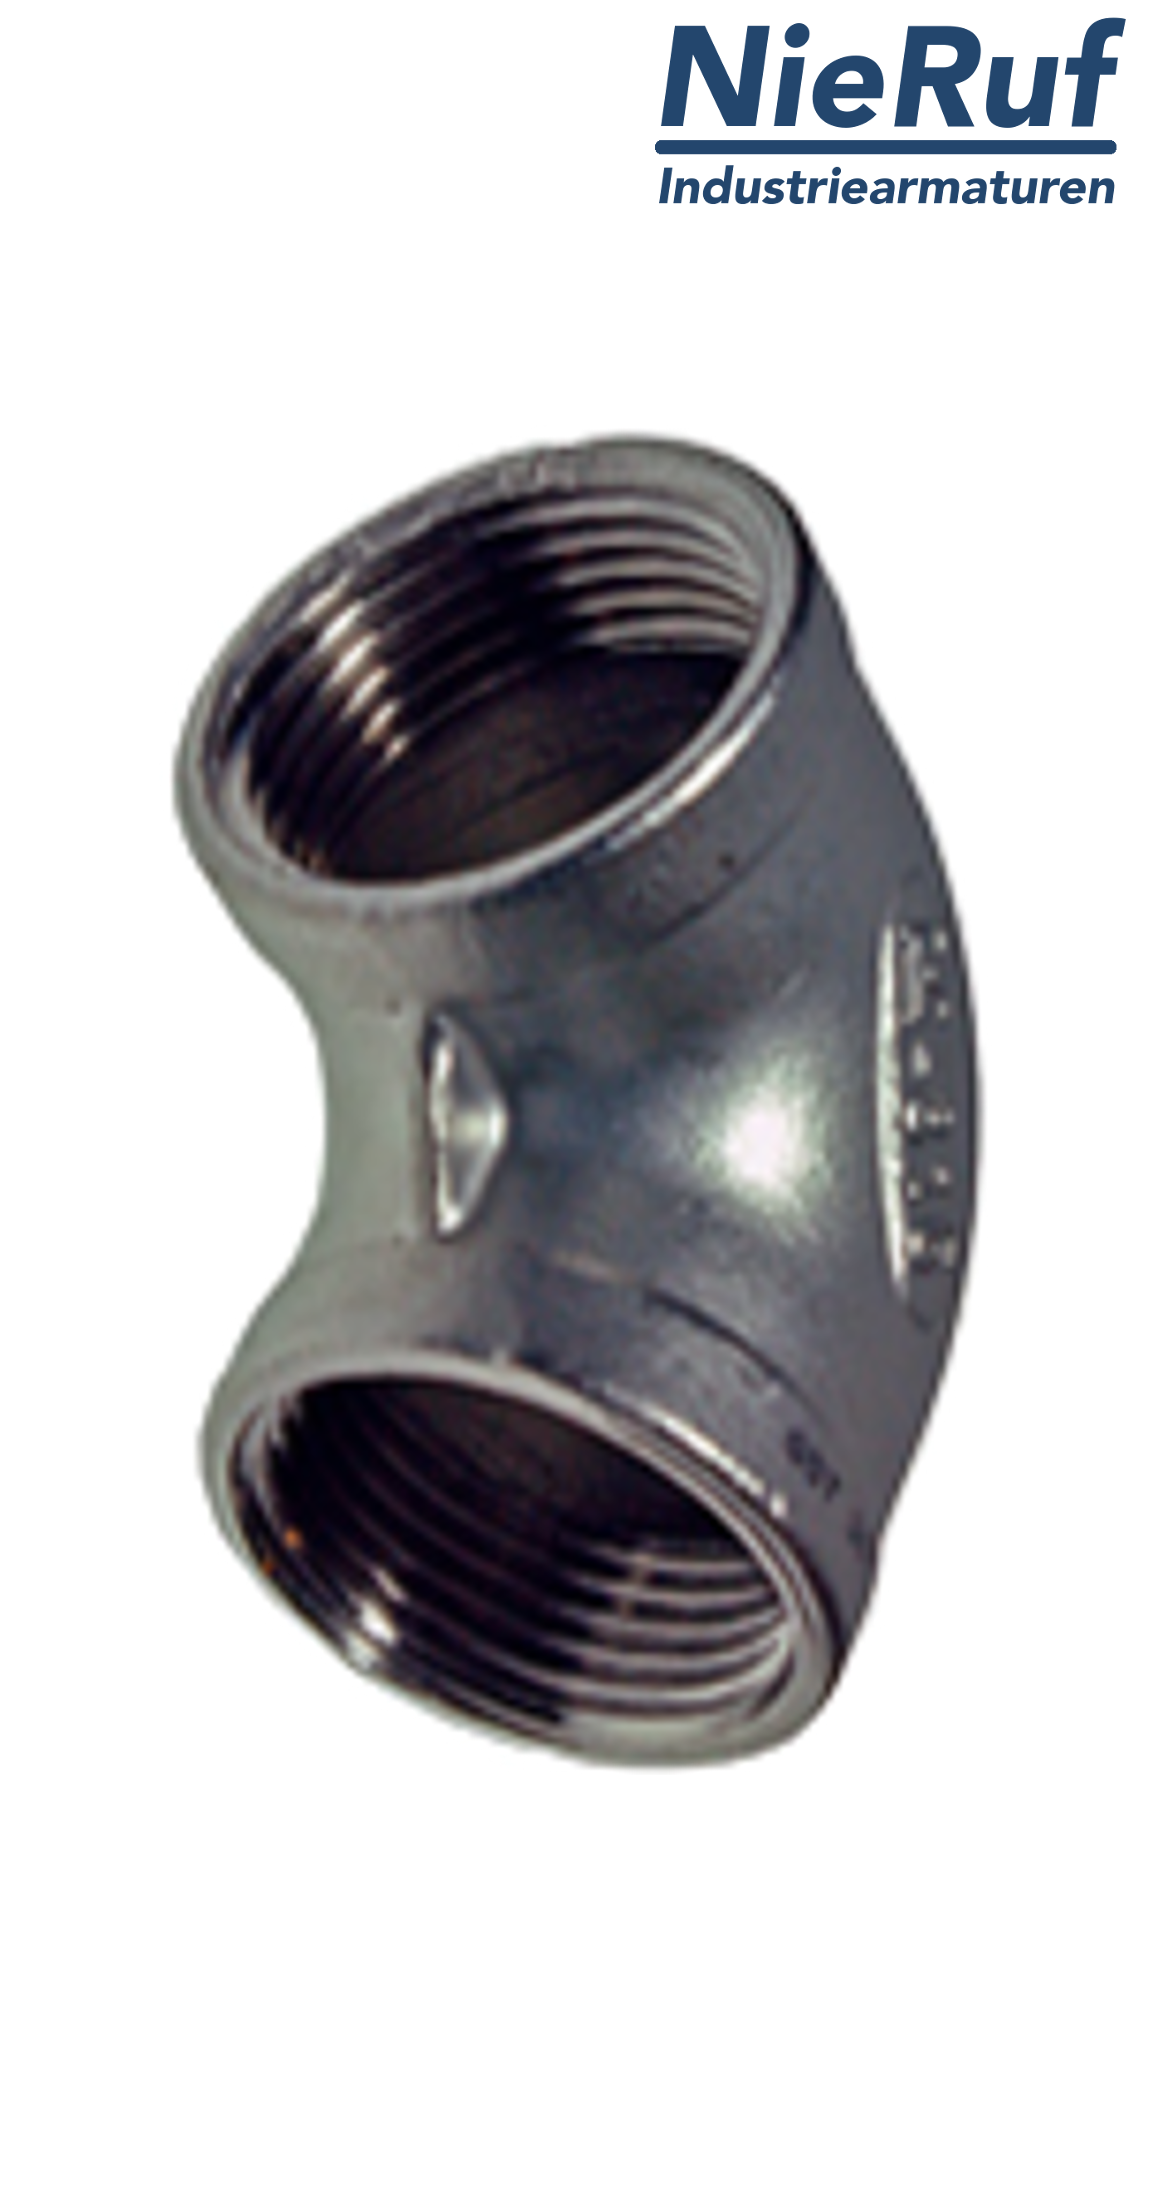 elbow 1" inch NPT stainless steel 316 90° angle